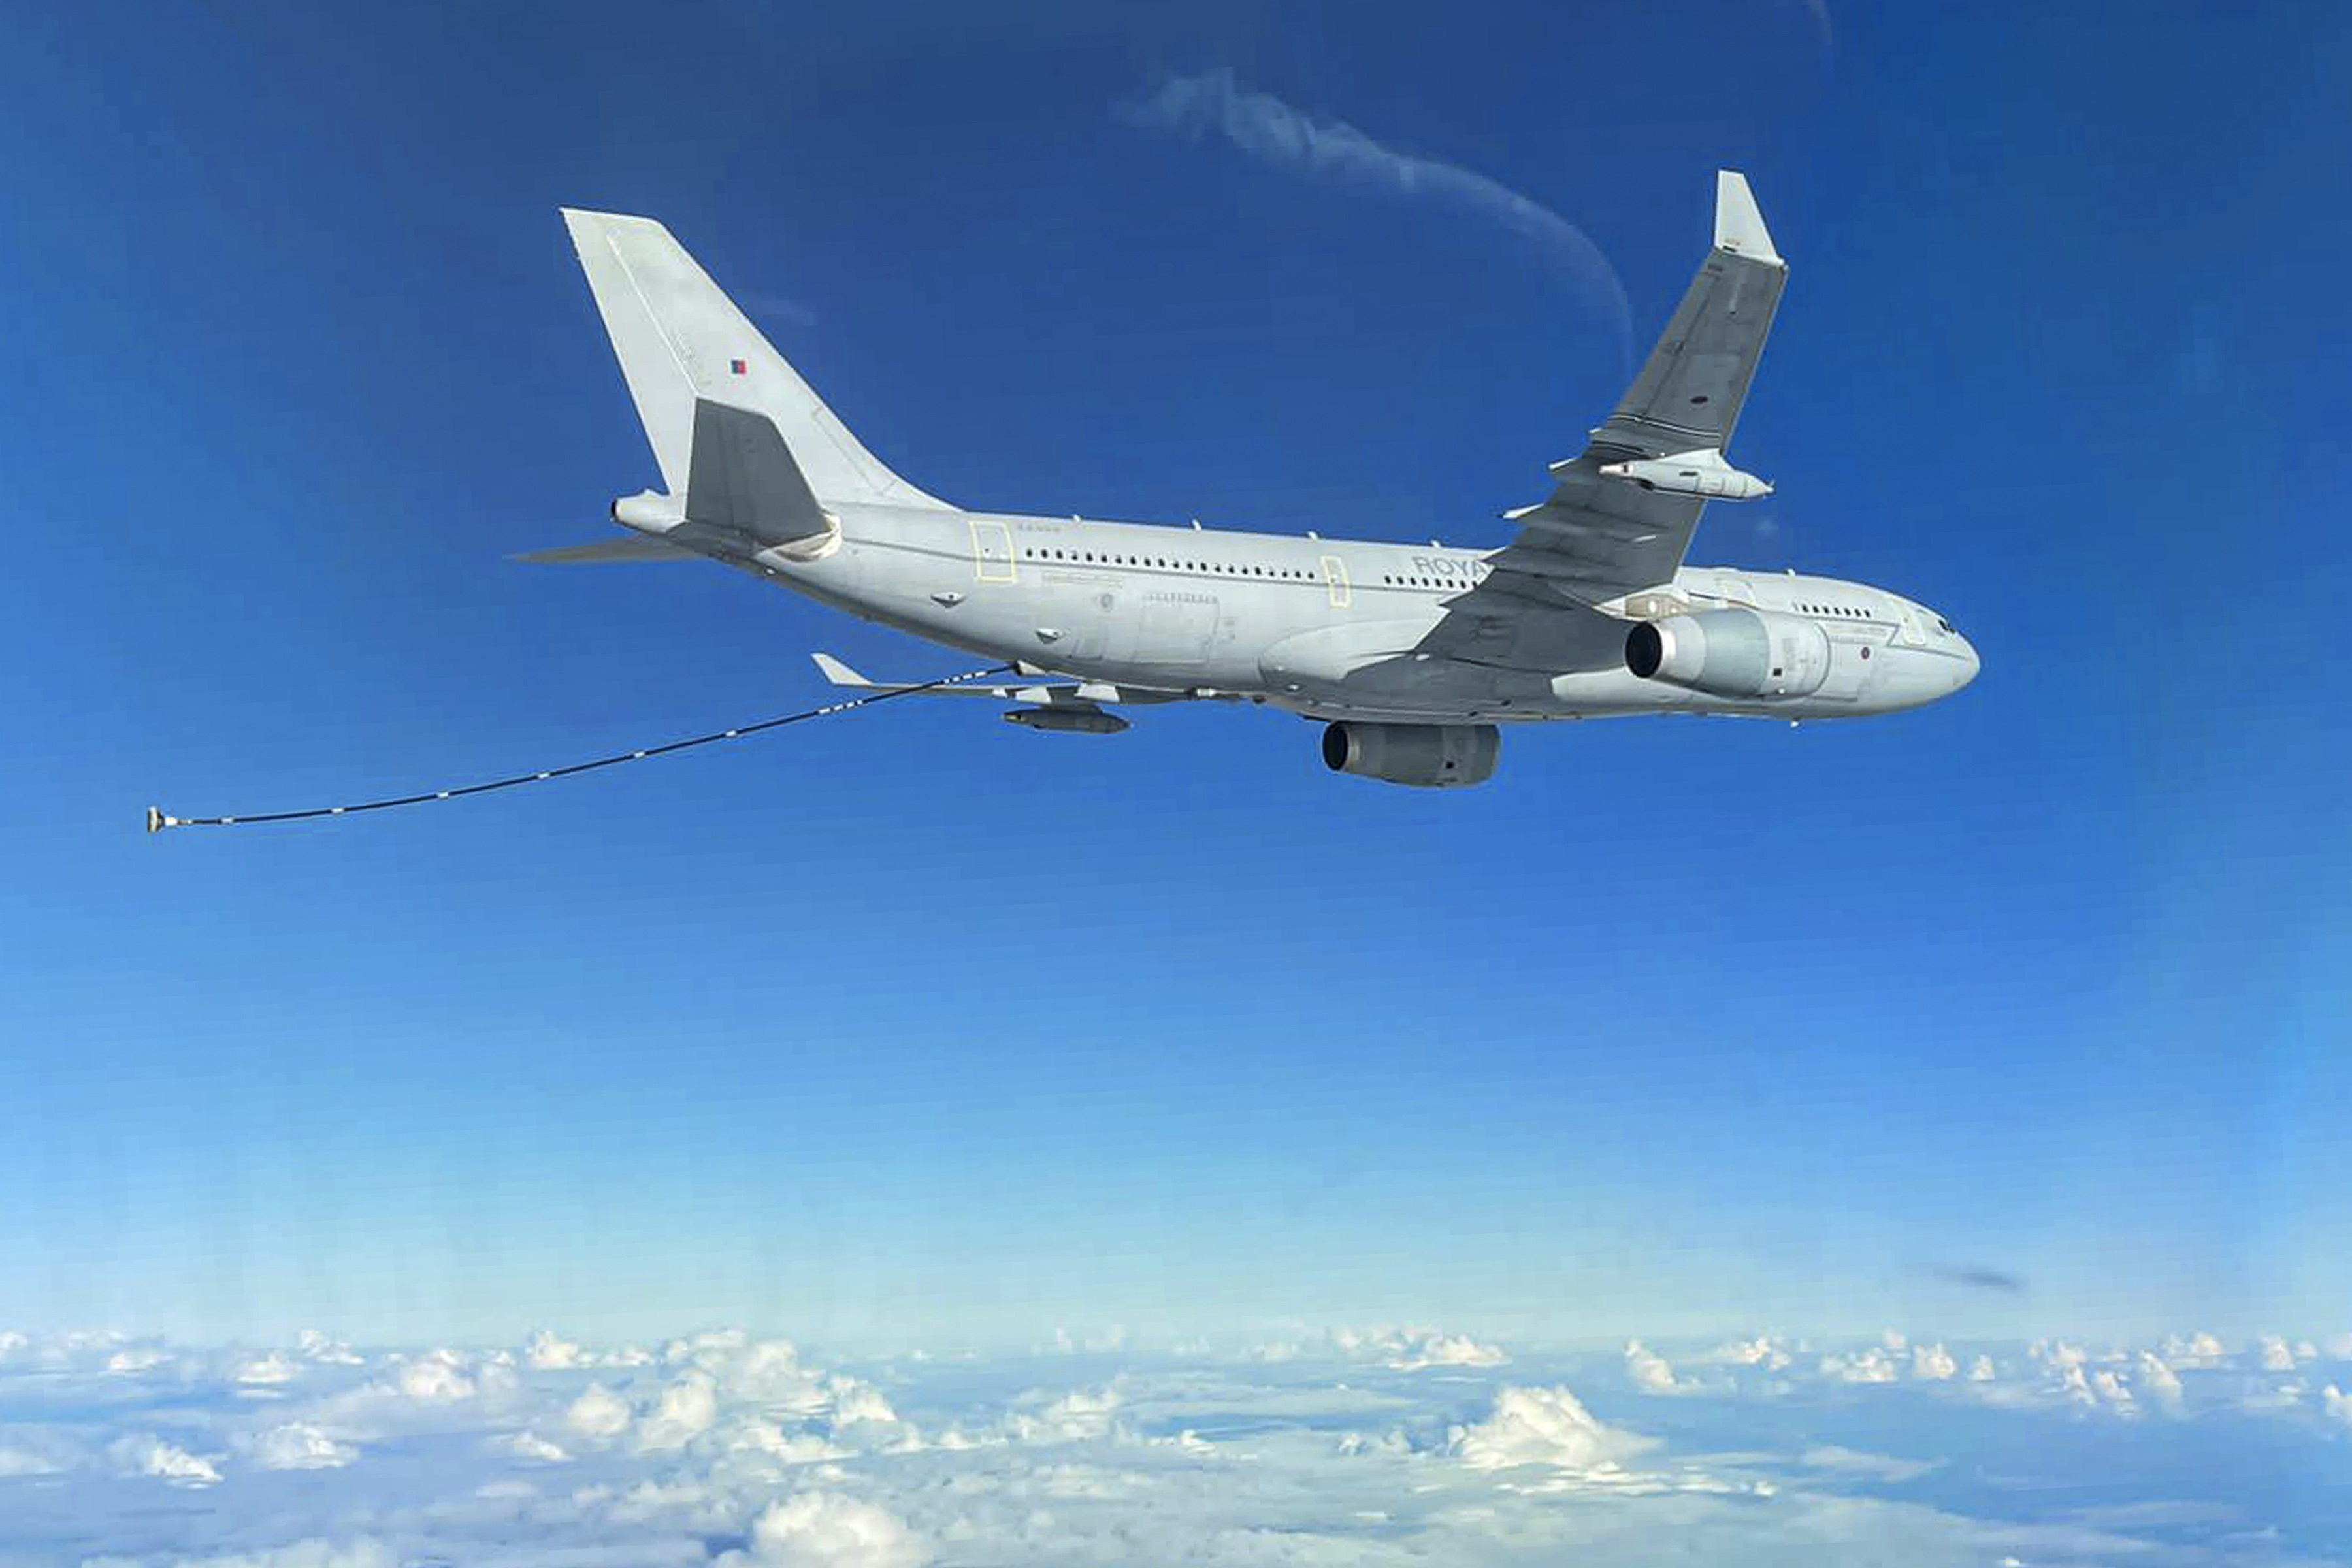 Image shows RAF Voyager during air-to-air refuelling.